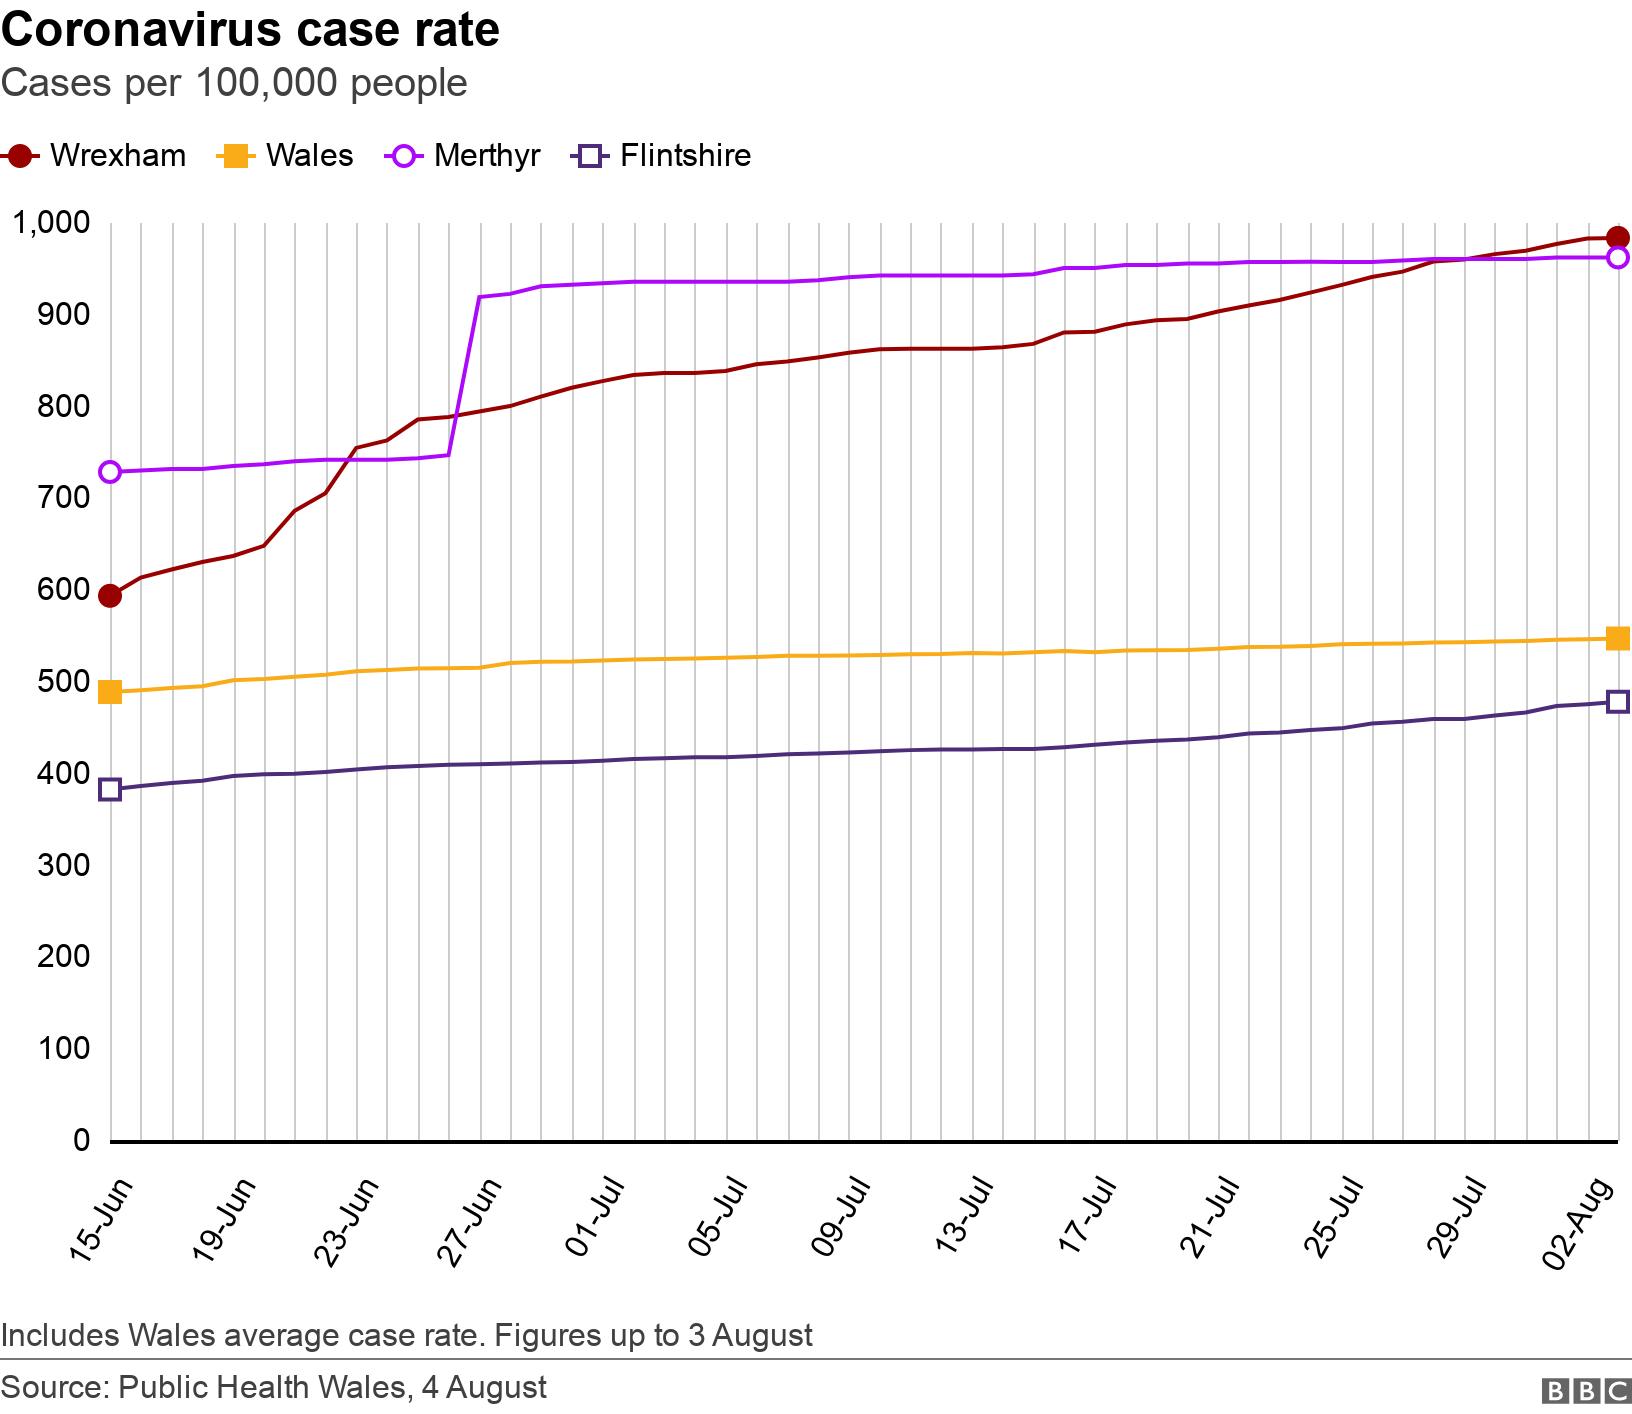 Coronavirus case rate. Cases per 100,000 people. Includes Wales average case rate. Figures up to 3 August.